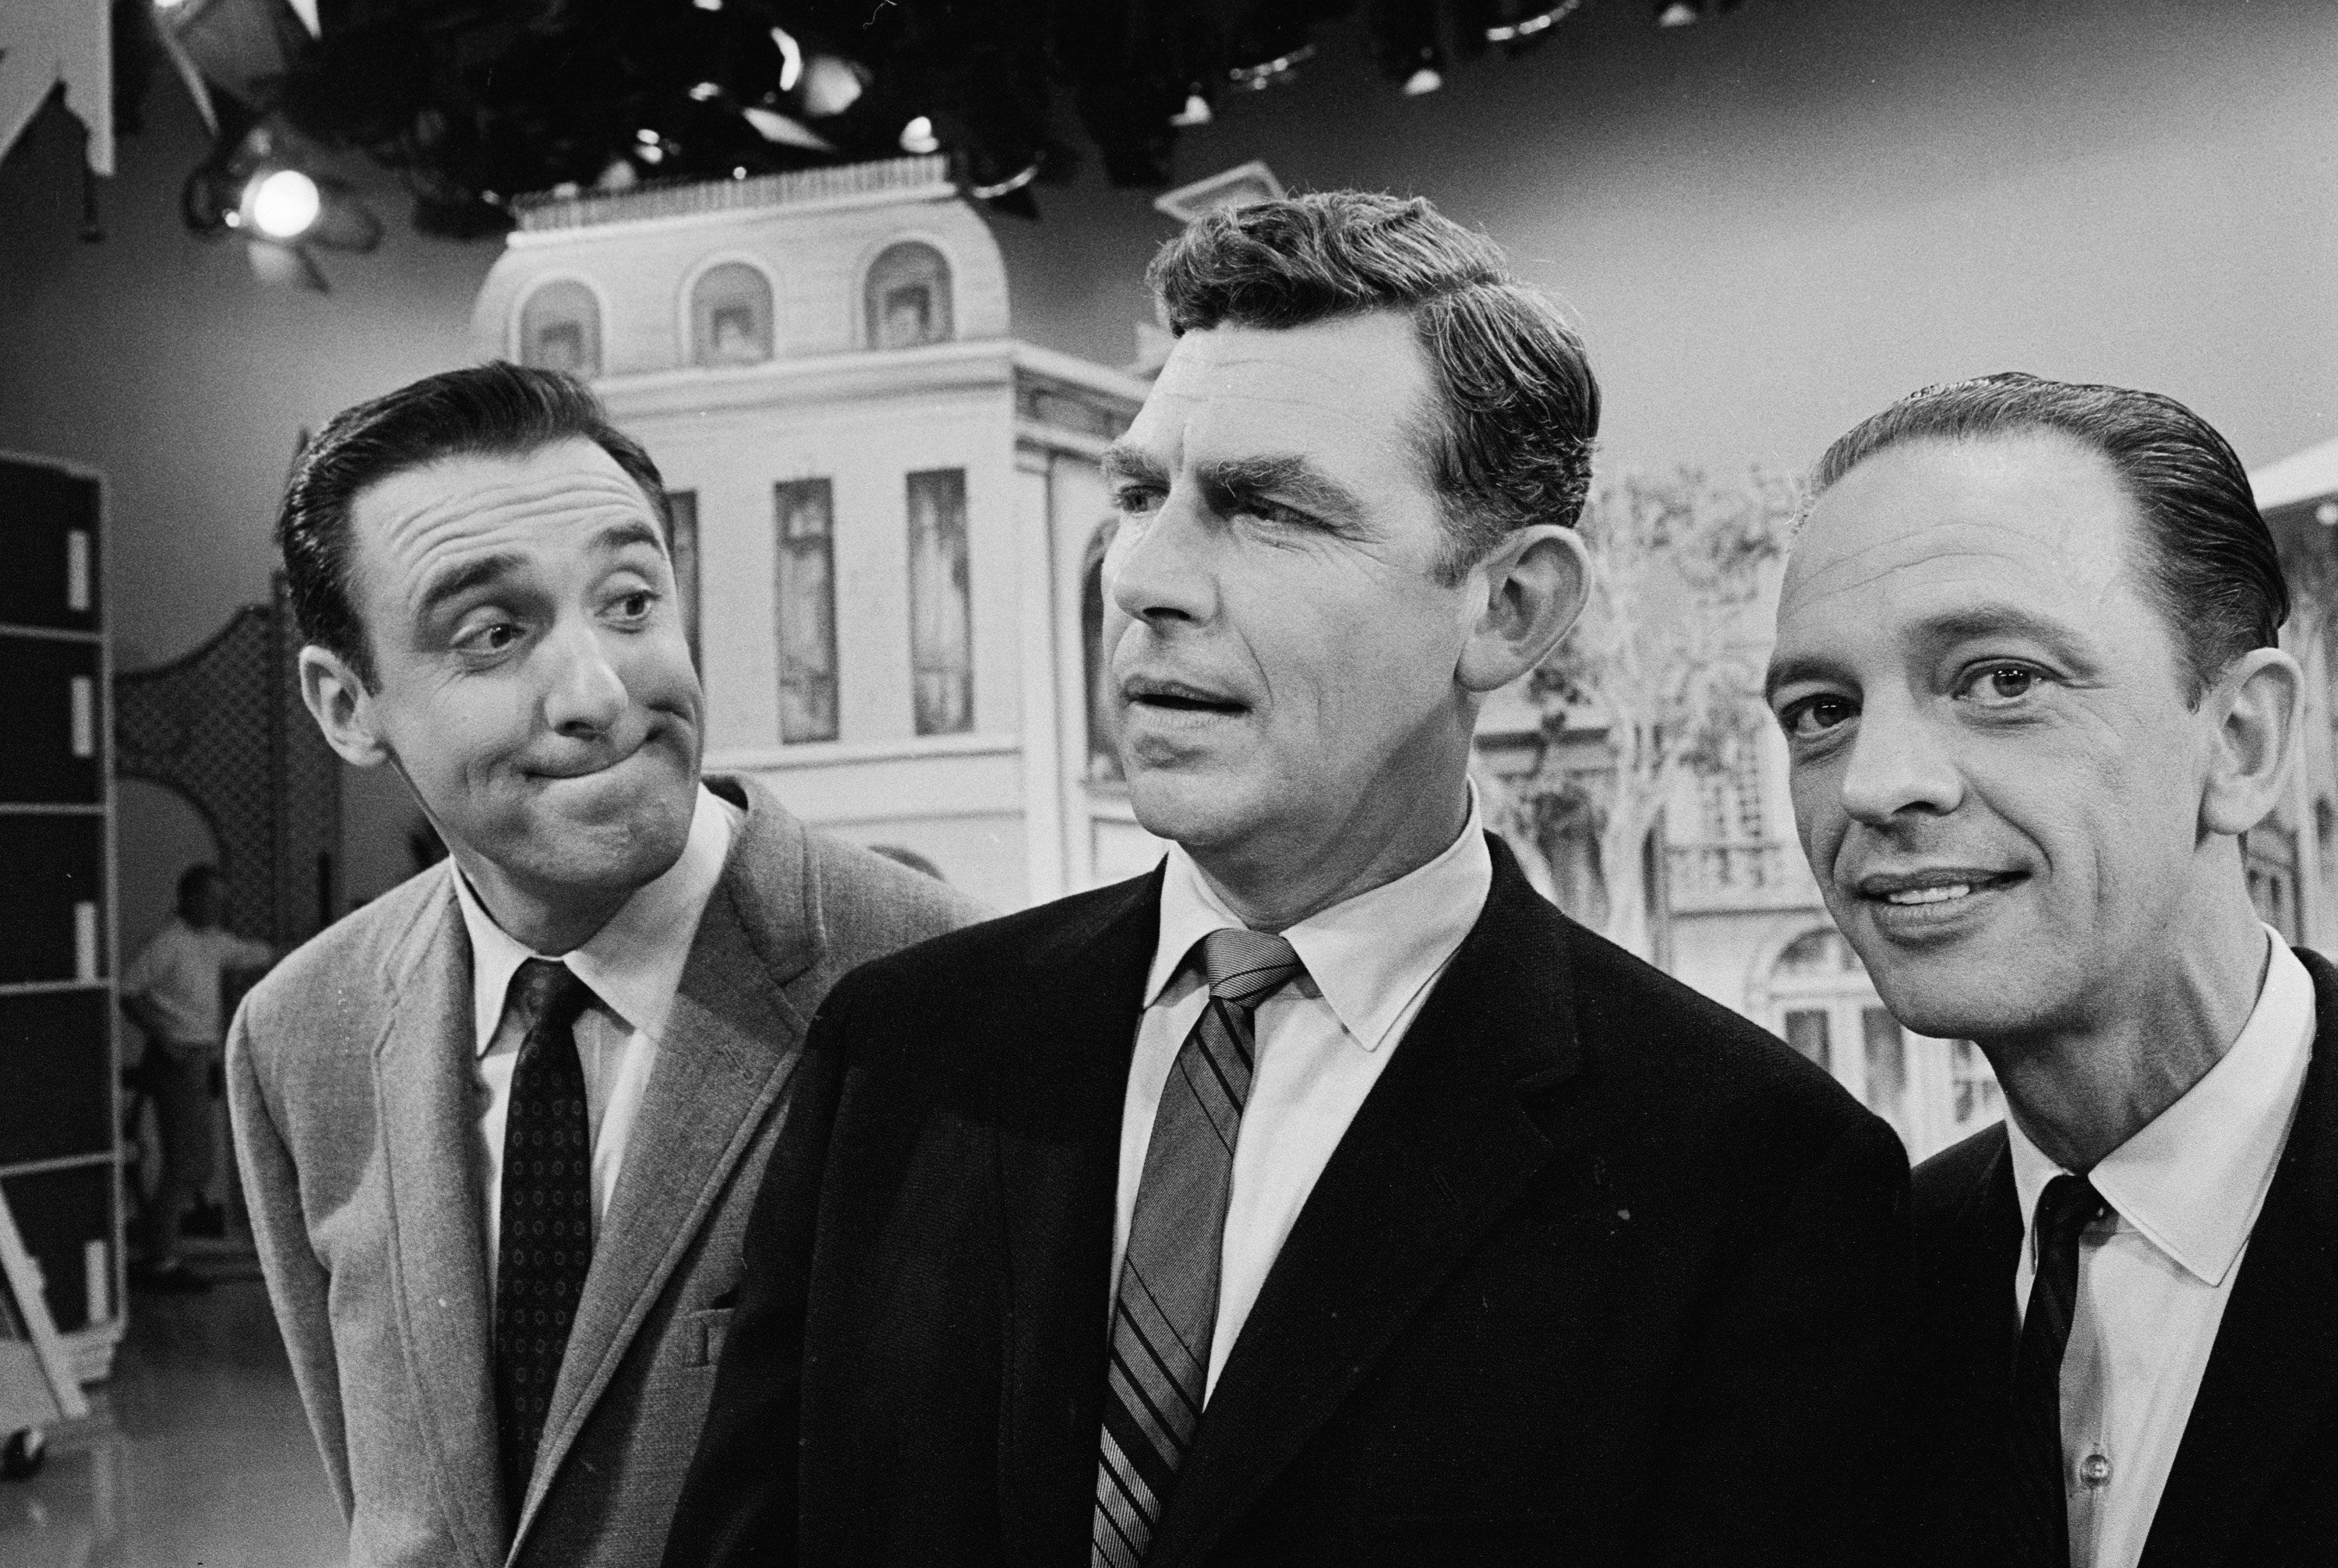 Jim Nabors, Andy Griffith and Don Knotts